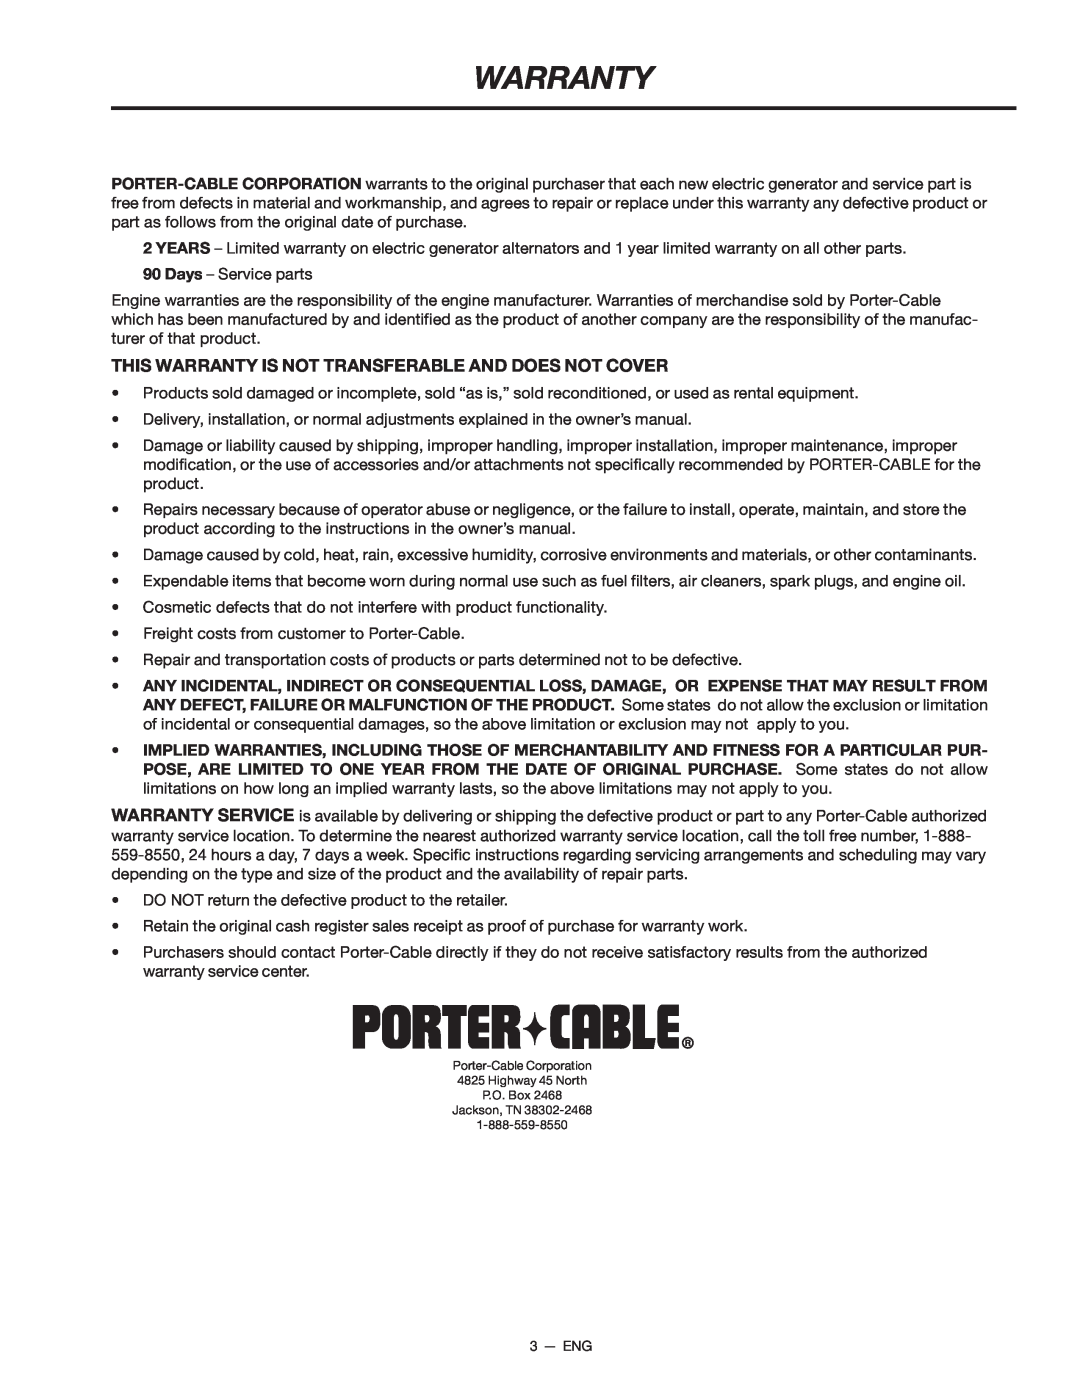 Porter-Cable D21679-008-0 instruction manual Warranty 